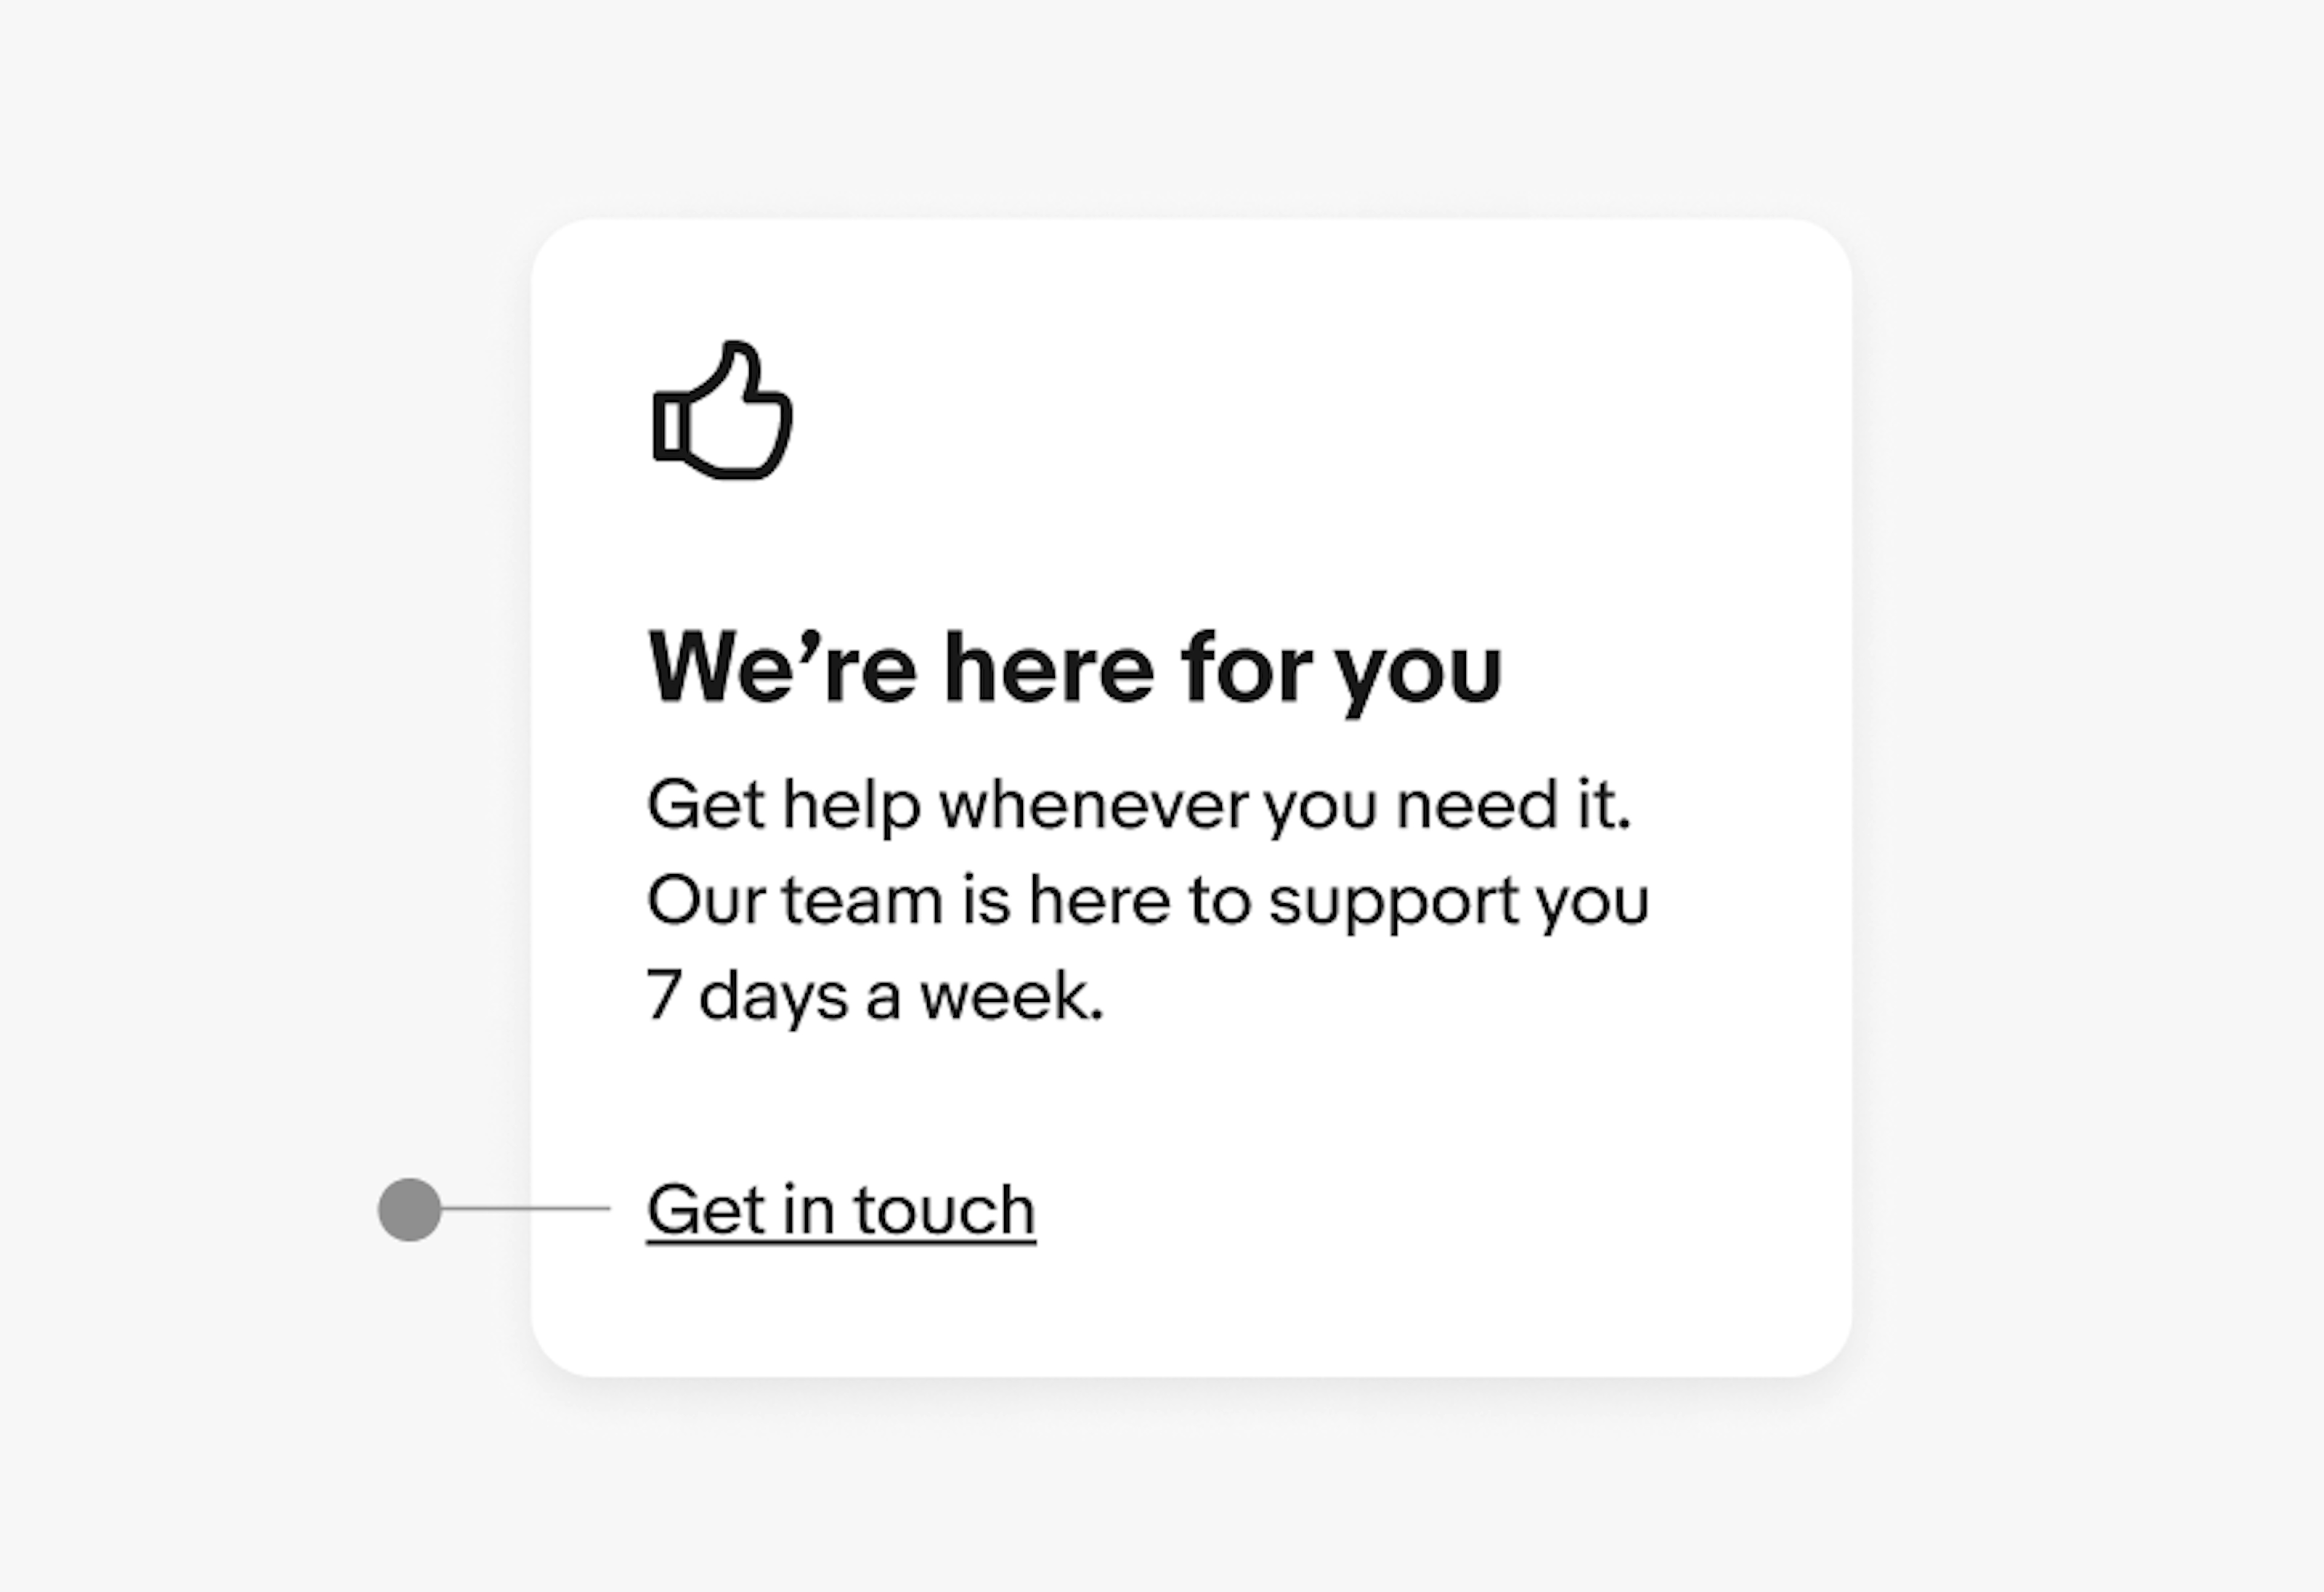 The link “Get in touch” highlighted with a gray dot.